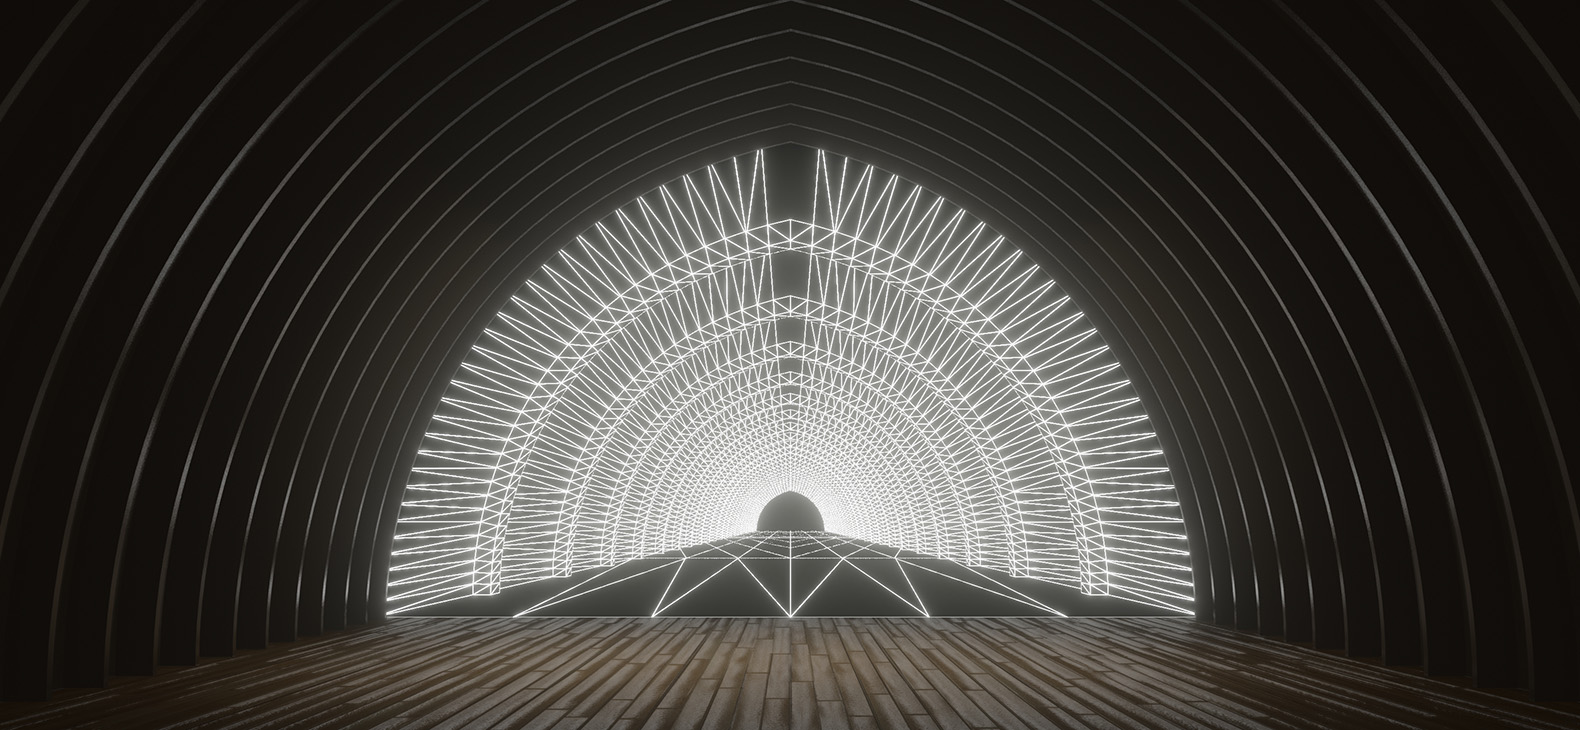 Simulation of the exhibition "Another Space" by Pavel Mrkus at the Schafhof - Europäisches Künstlerhaus Oberbayern; a complex white line structure fills the front wall of the barrel vault in the Schafhof, starting from the vanishing point of the central perspective